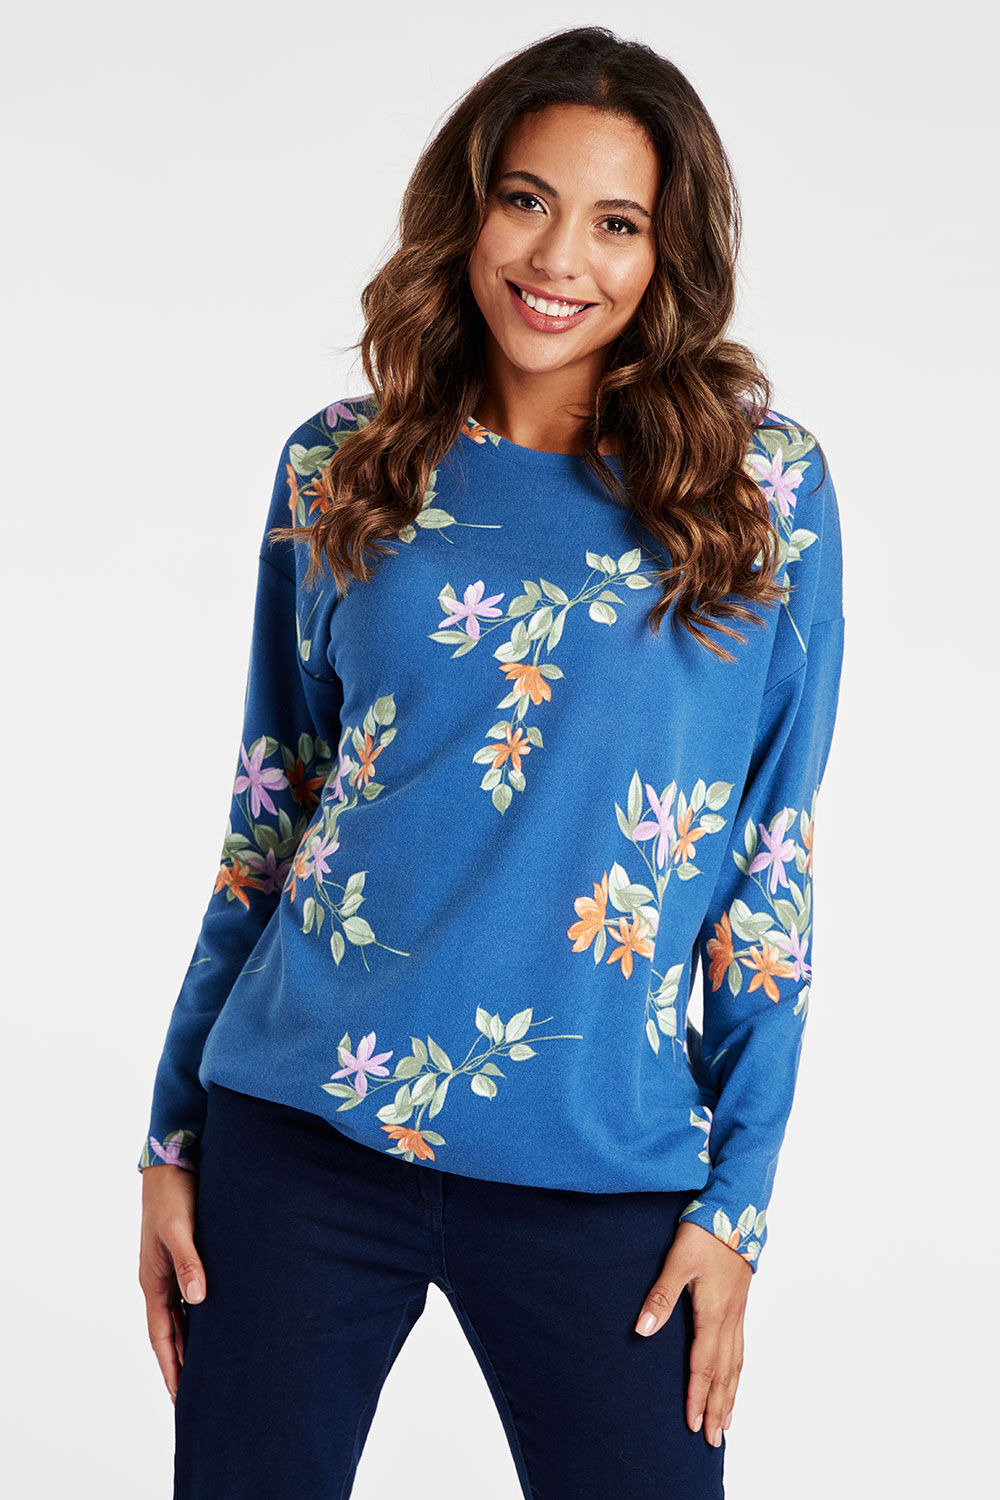 Bonmarche Navy Long Sleeve All Over Floral Print Soft Touch Top, Size: 14